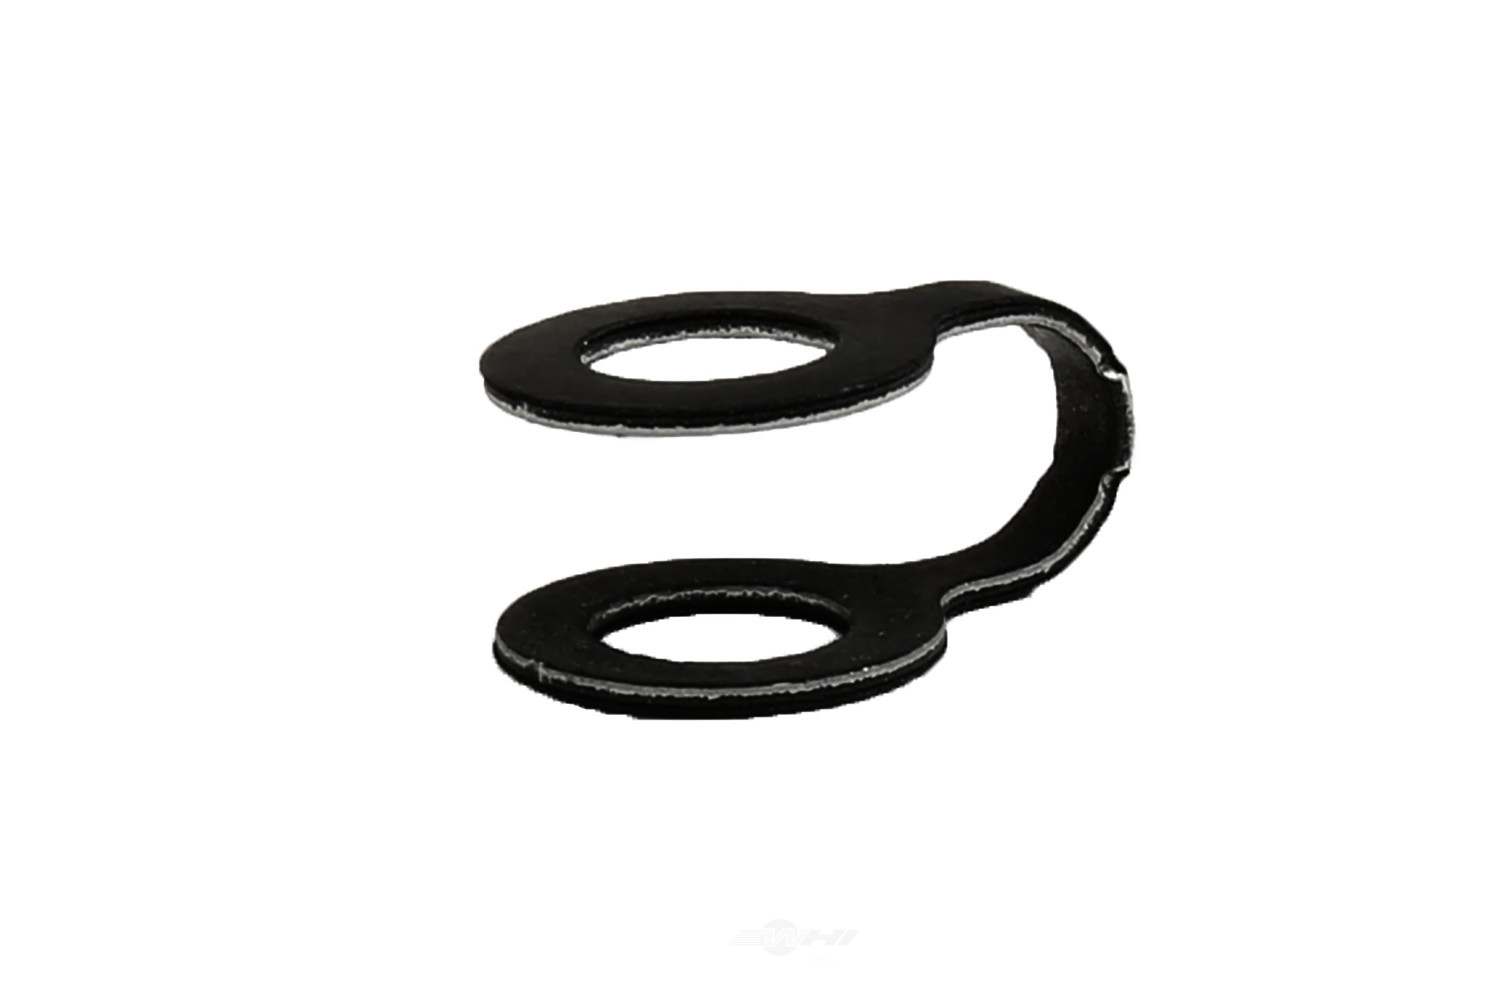 GM GENUINE PARTS - Fuel Line Seal Ring - GMP 12630832